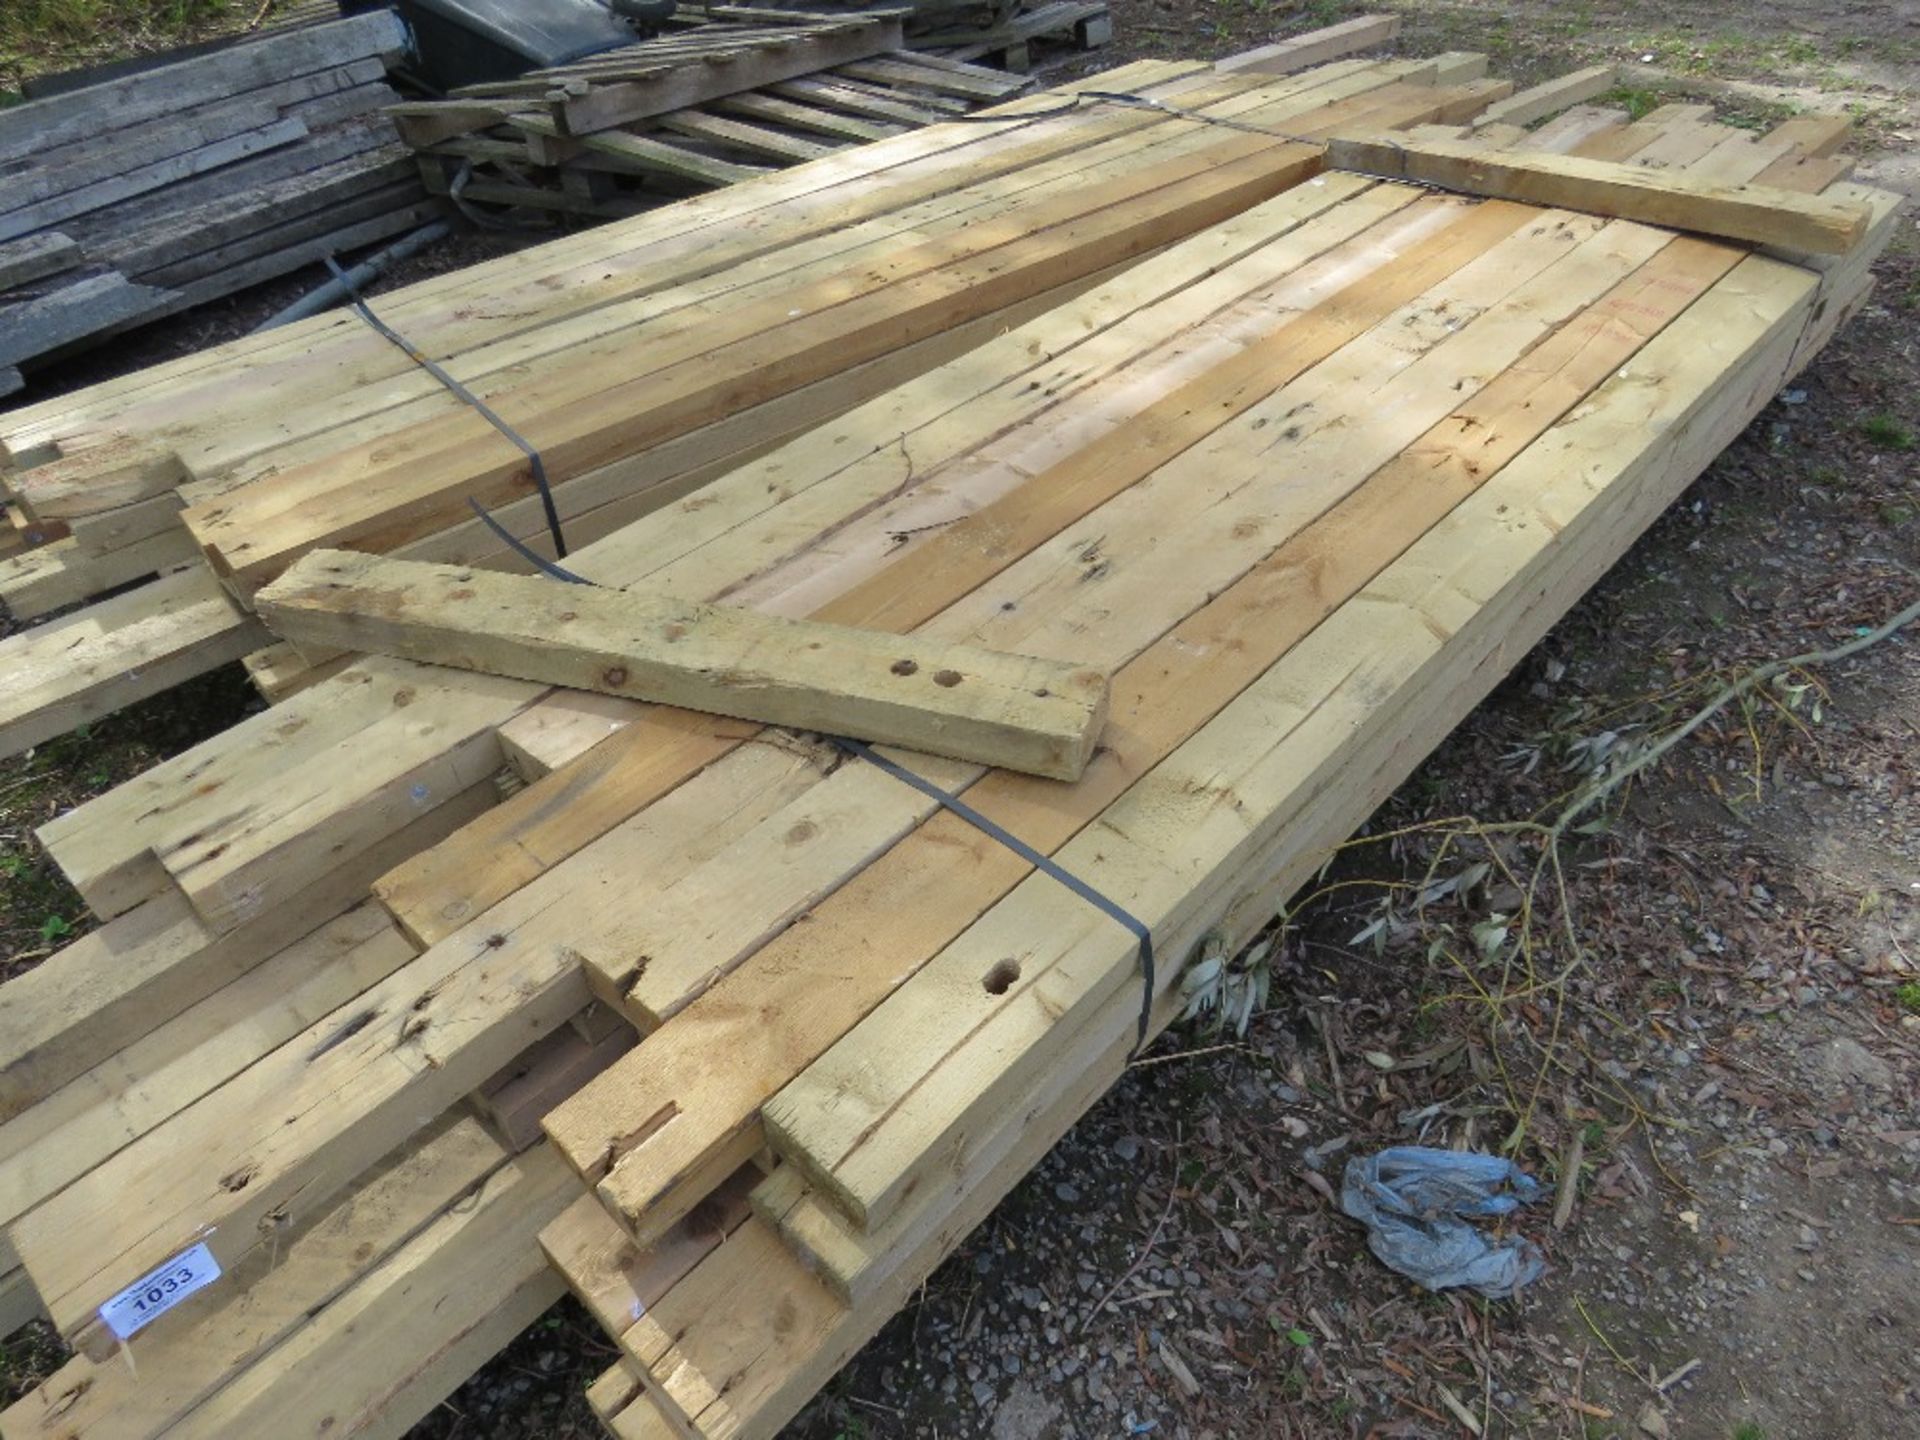 2 X BUNDLES OF PRE USED DE-NAILED 4X2 TIMBER. MAJORITY BEING 2.4-3M LENGTH APPROX. 32 PIECES IN EACH